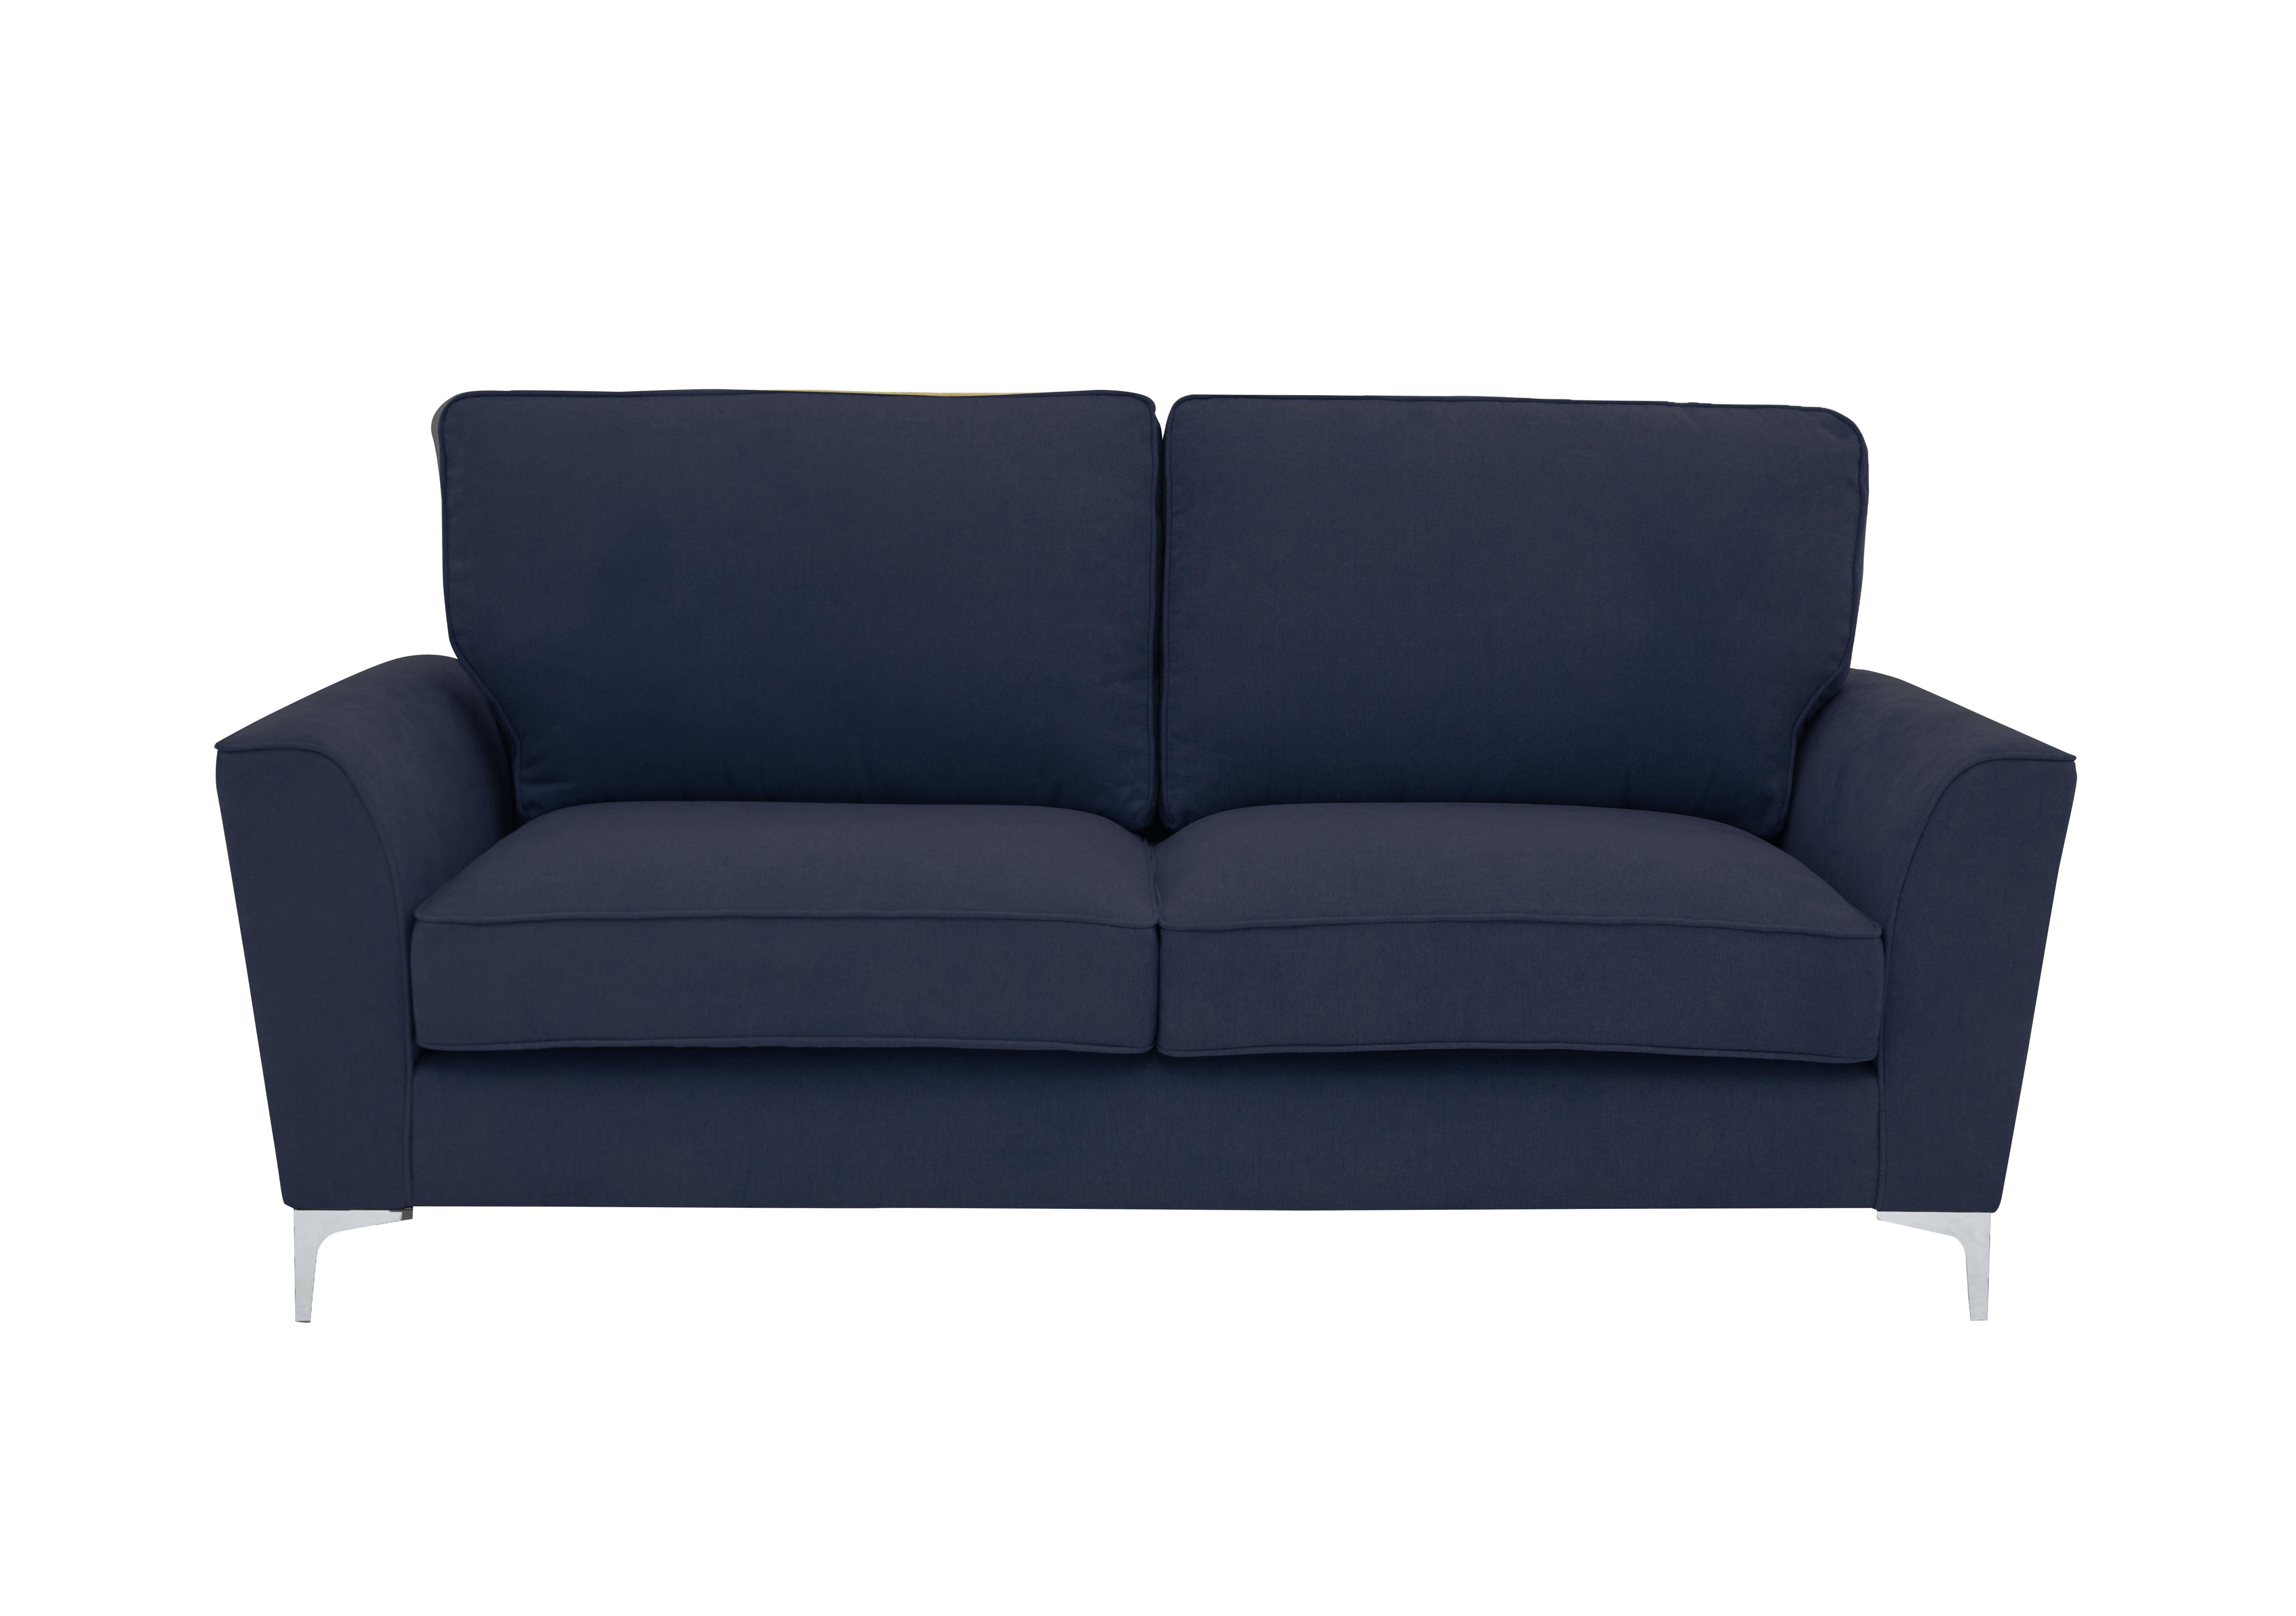 Legend 3 Seater Classic Back Fabric Sofa in Cosmo Navy on Furniture Village